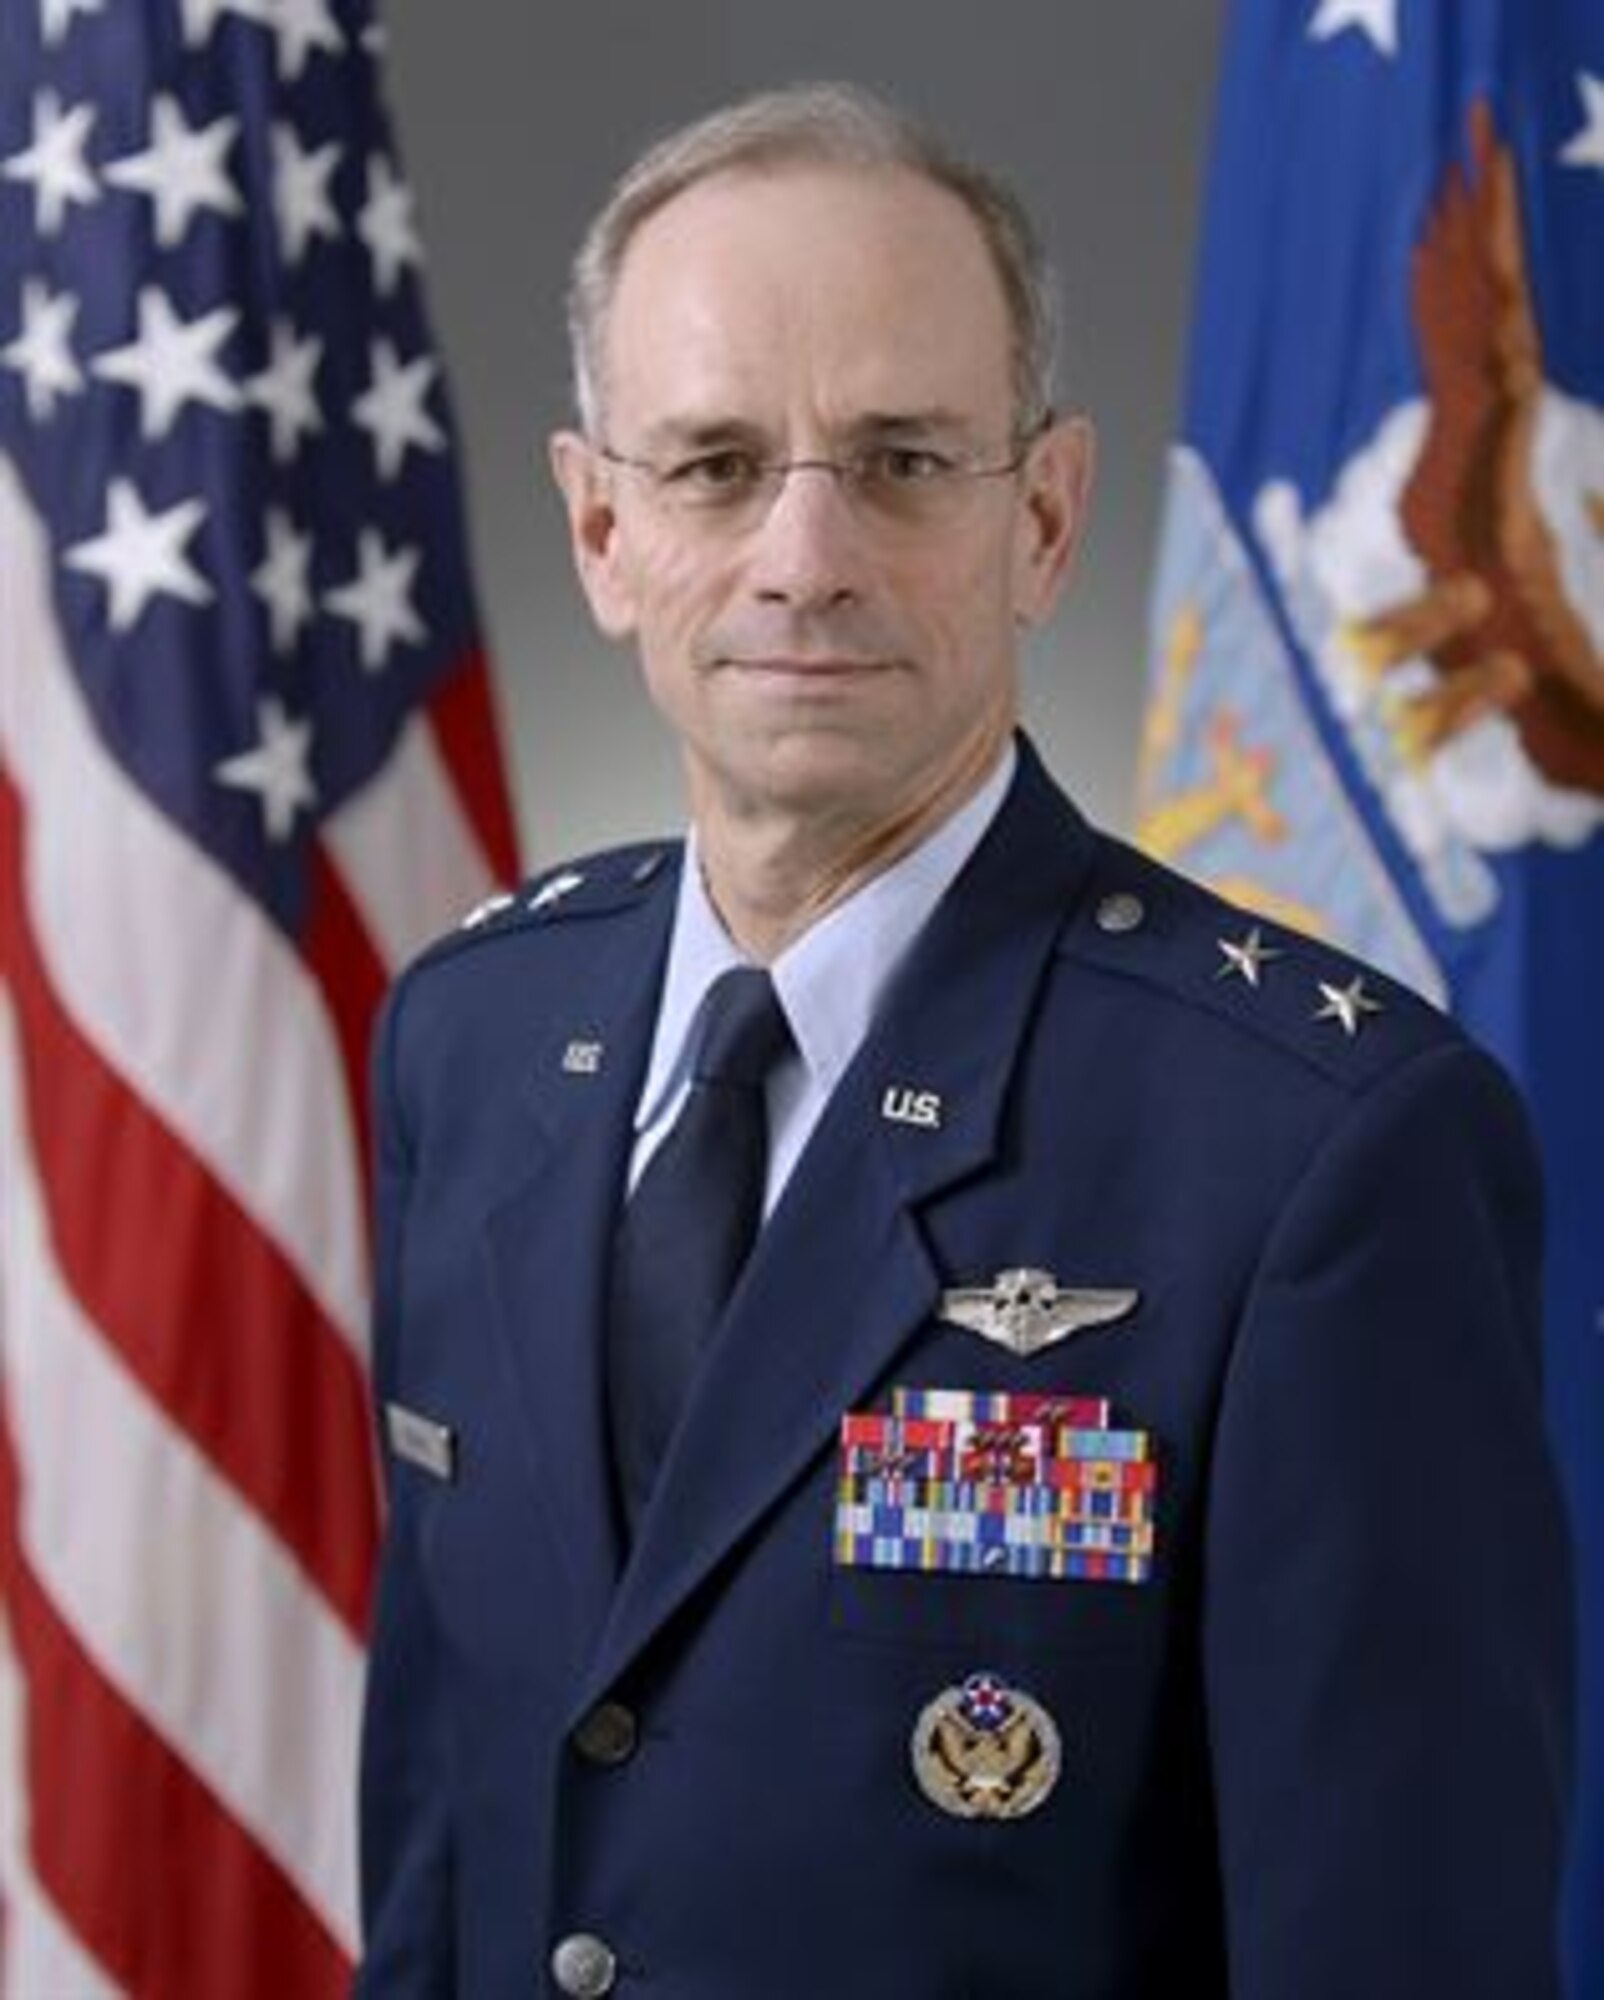 Maj. Gen. (Dr.) Mark A. Ediger is the Deputy Surgeon General, Office of the Surgeon General, Headquarters U.S. Air Force, Washington, D.C. He has recently been named to promote to Air Force Surgeon General in June 2015.